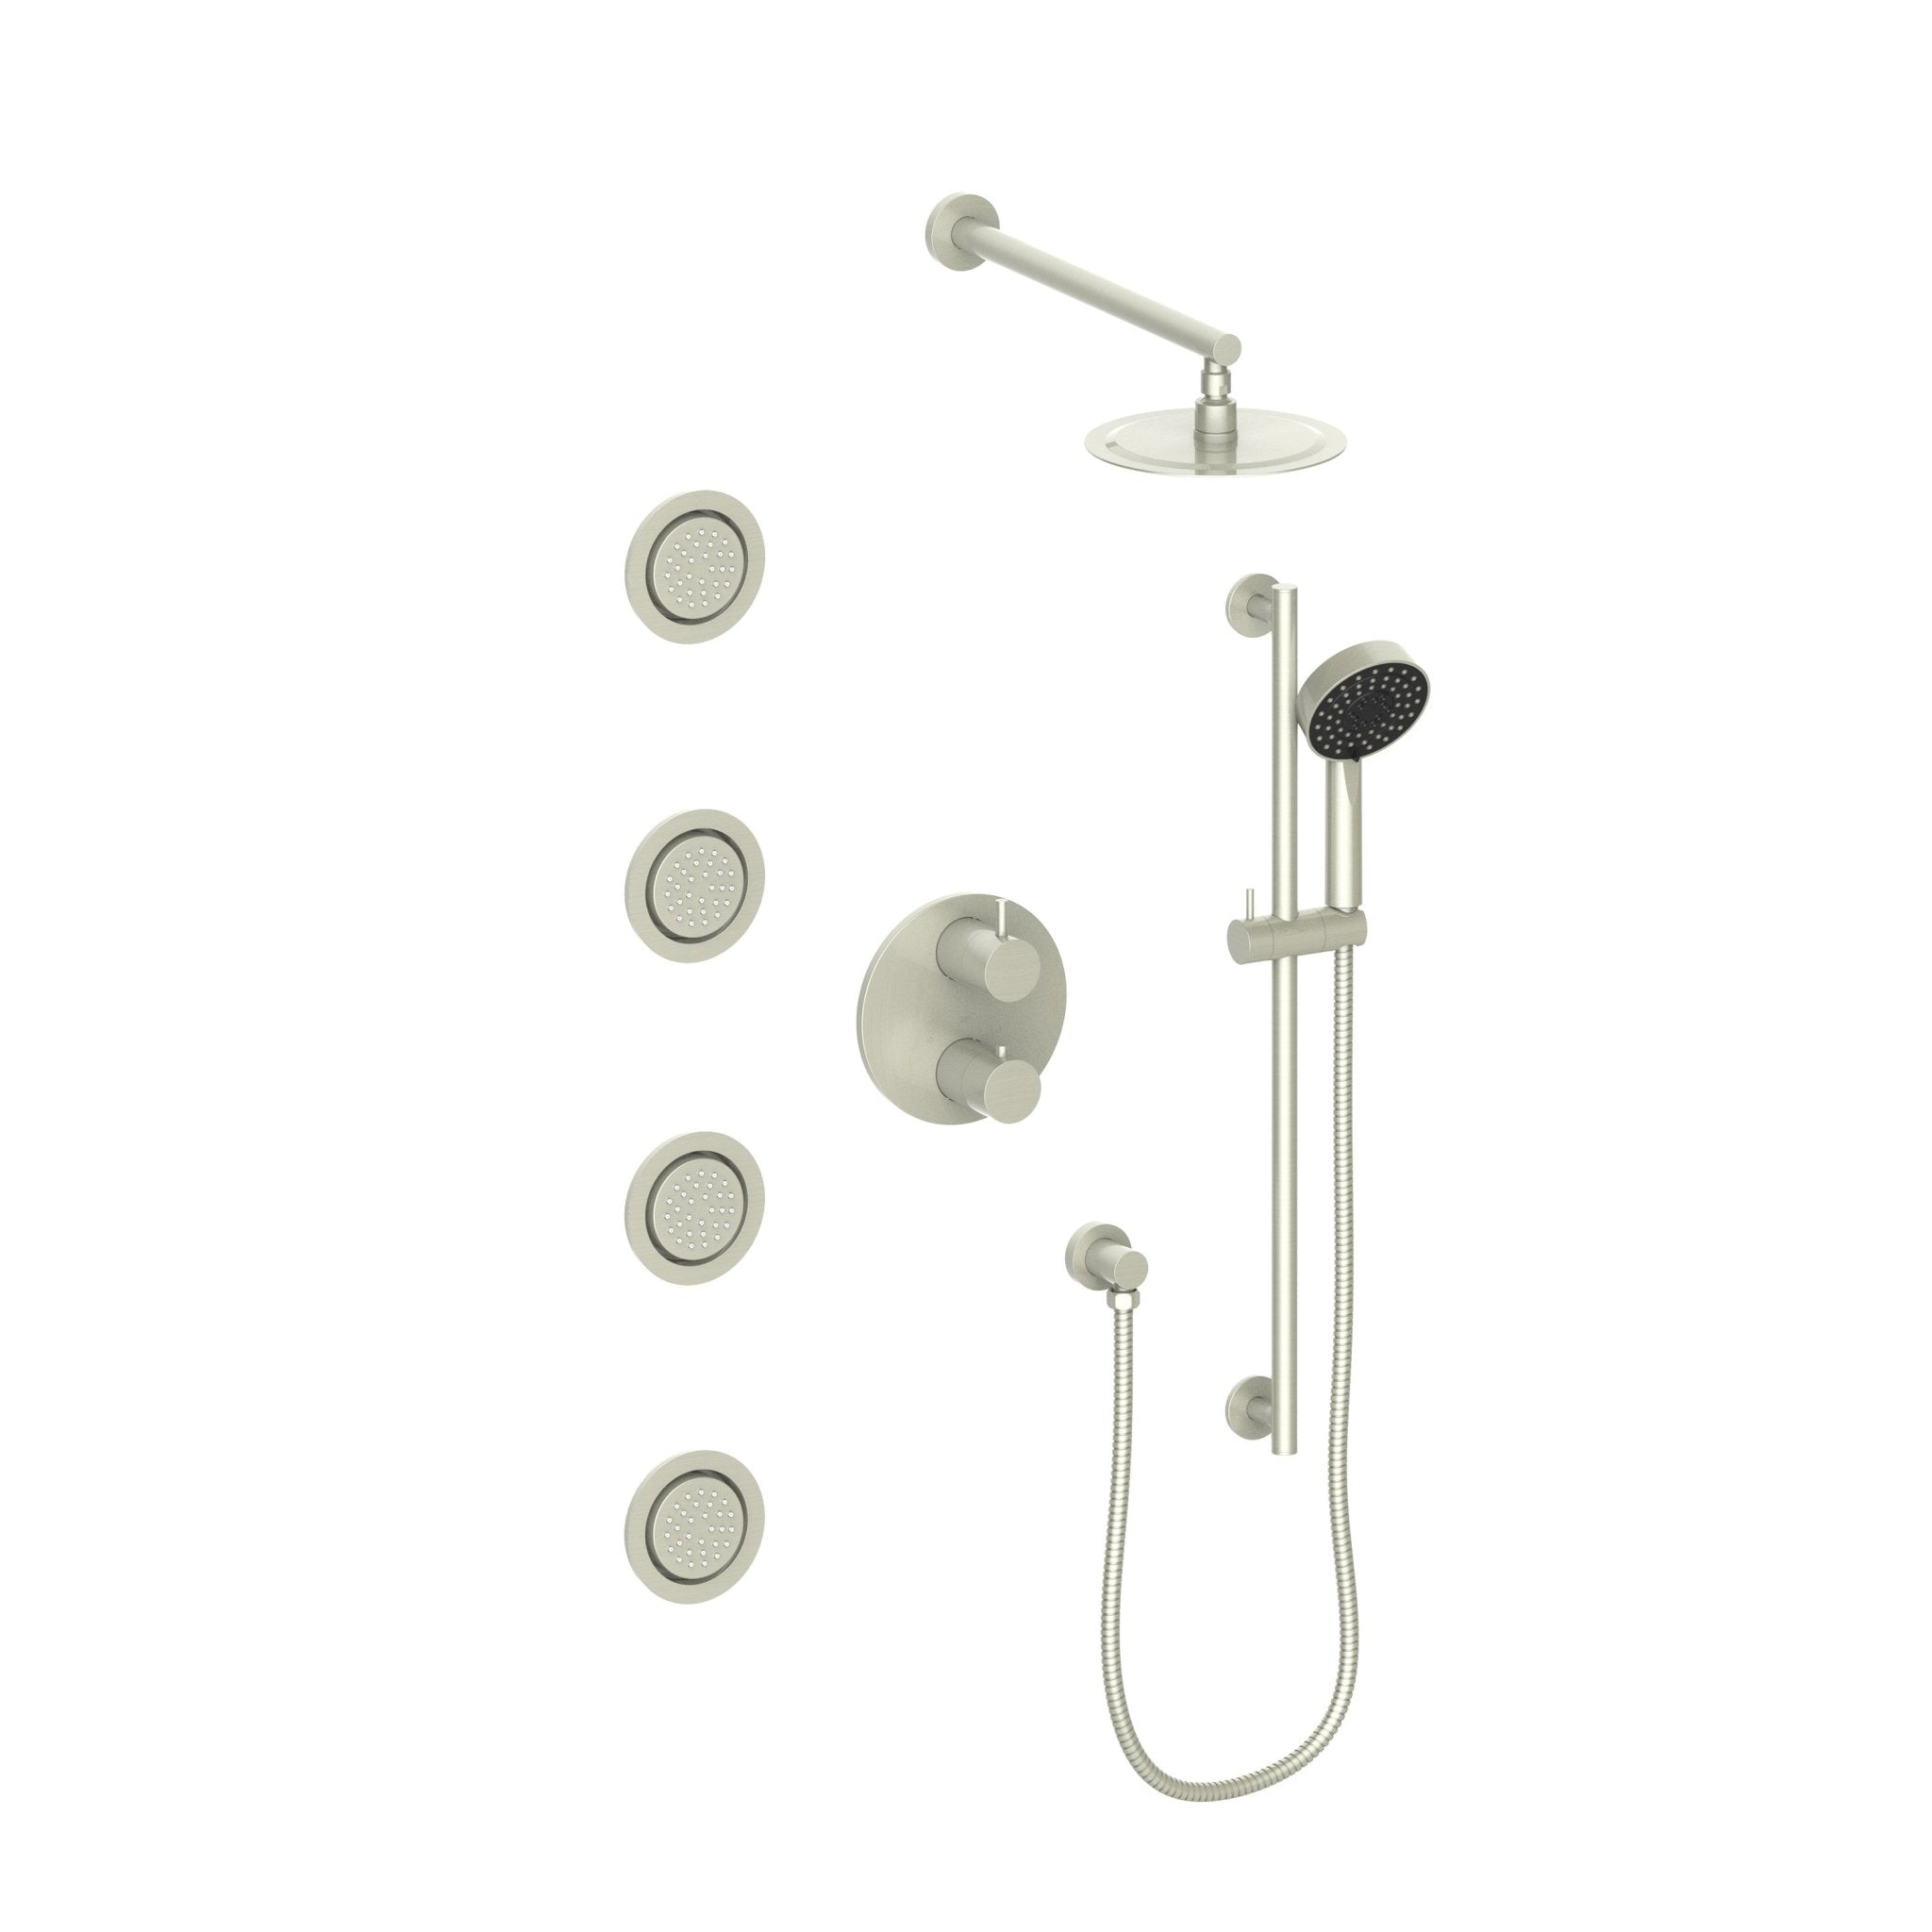 ZLINE Emerald Bay Thermostatic Shower System with Body Jets (EMBY-SHS-T3) in brushed nickel